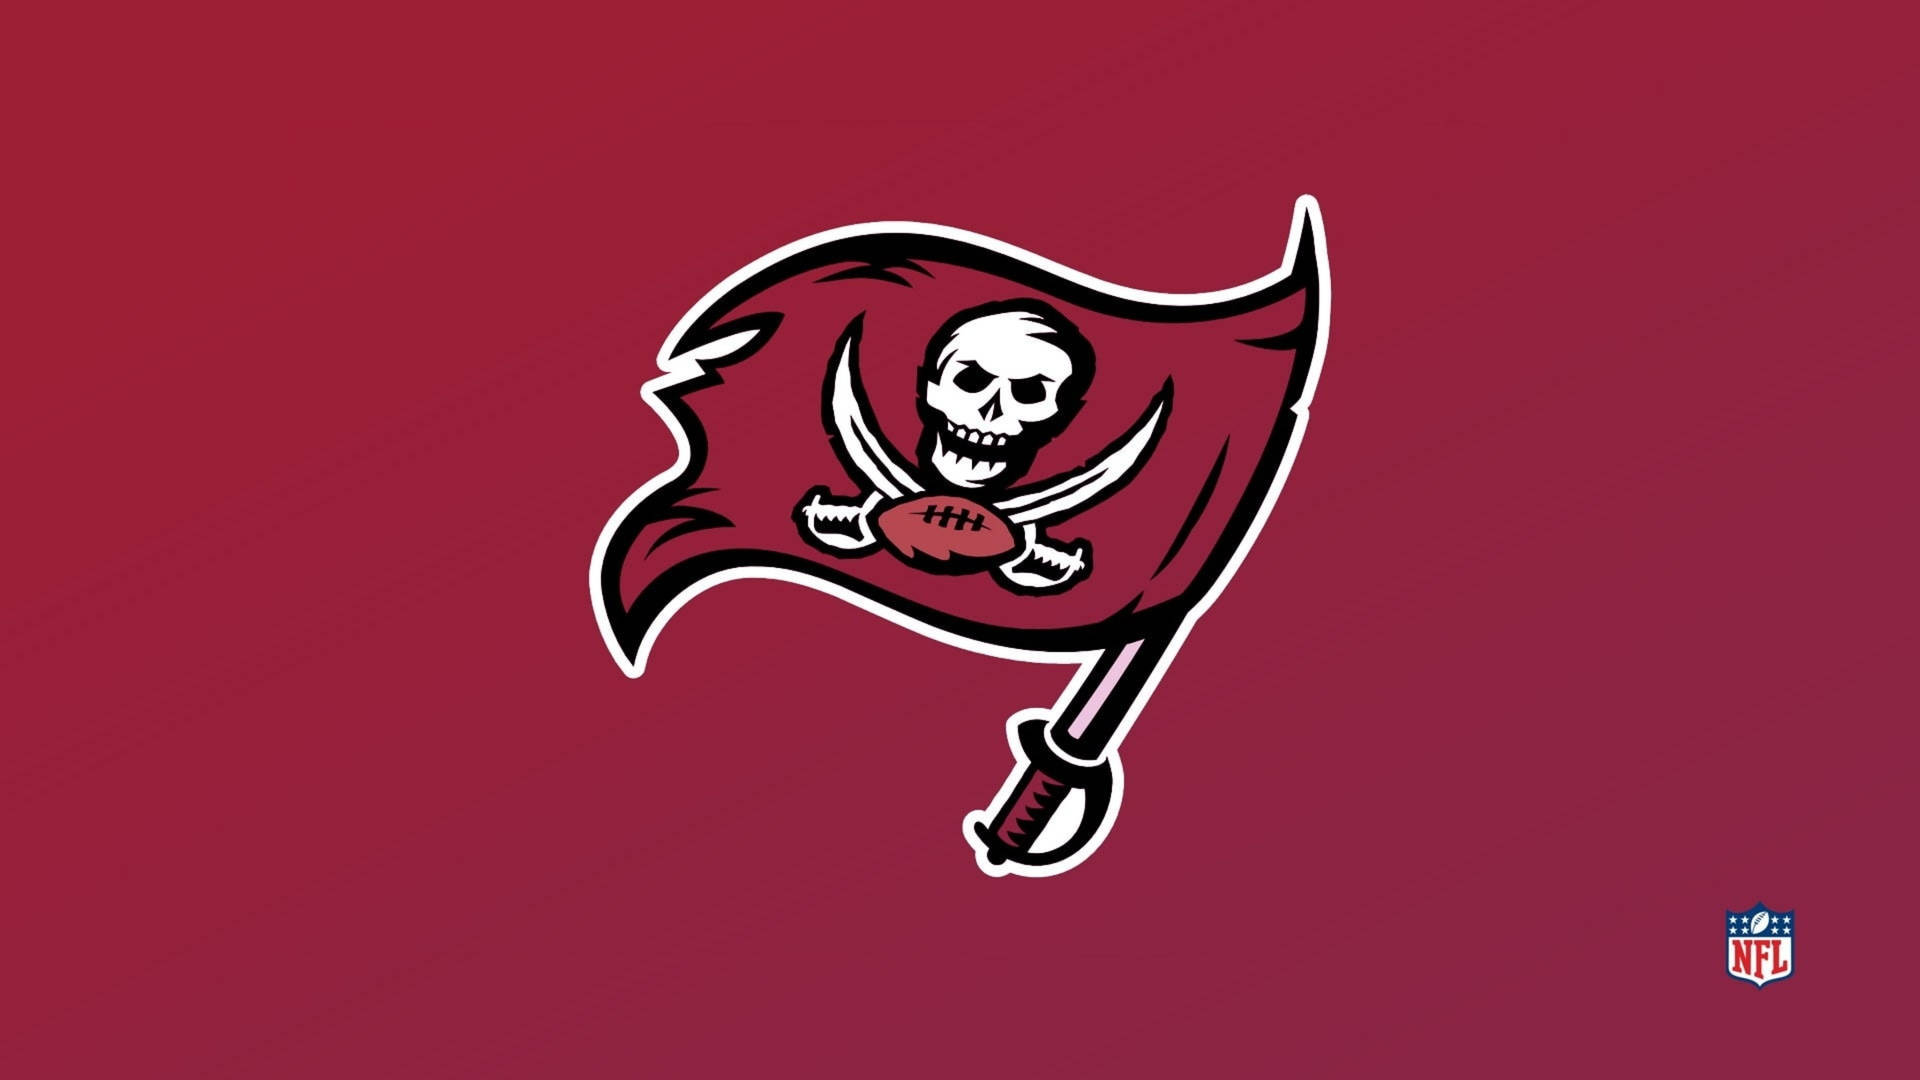 Tampa Bay Buccaneers Artistic Logo Background